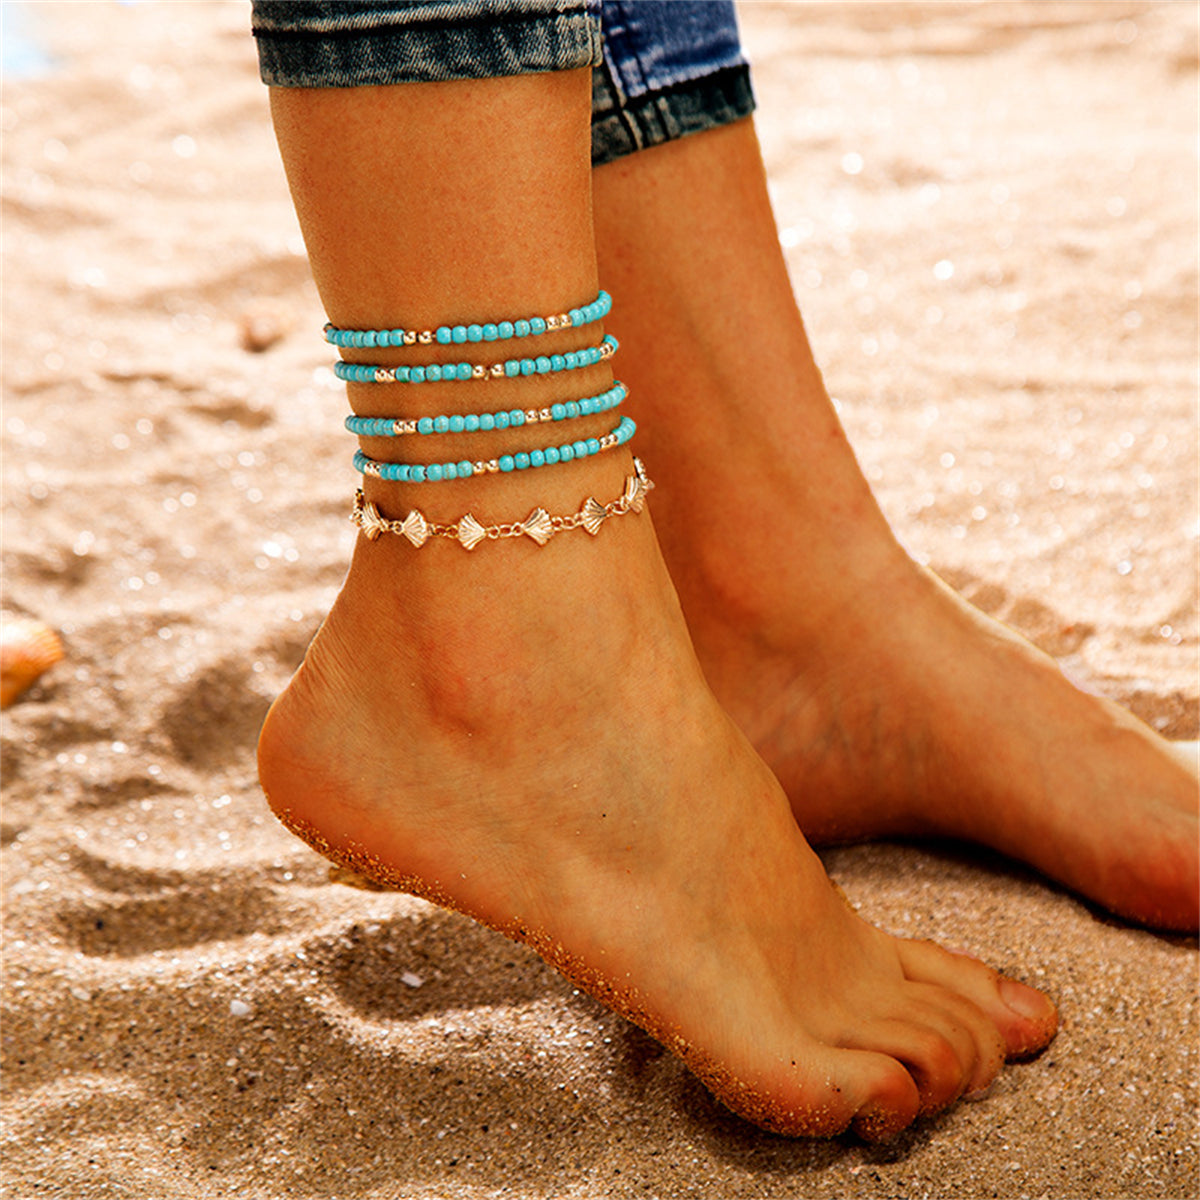 Turquoise & 18K Gold-Plated Beaded Anklet Set